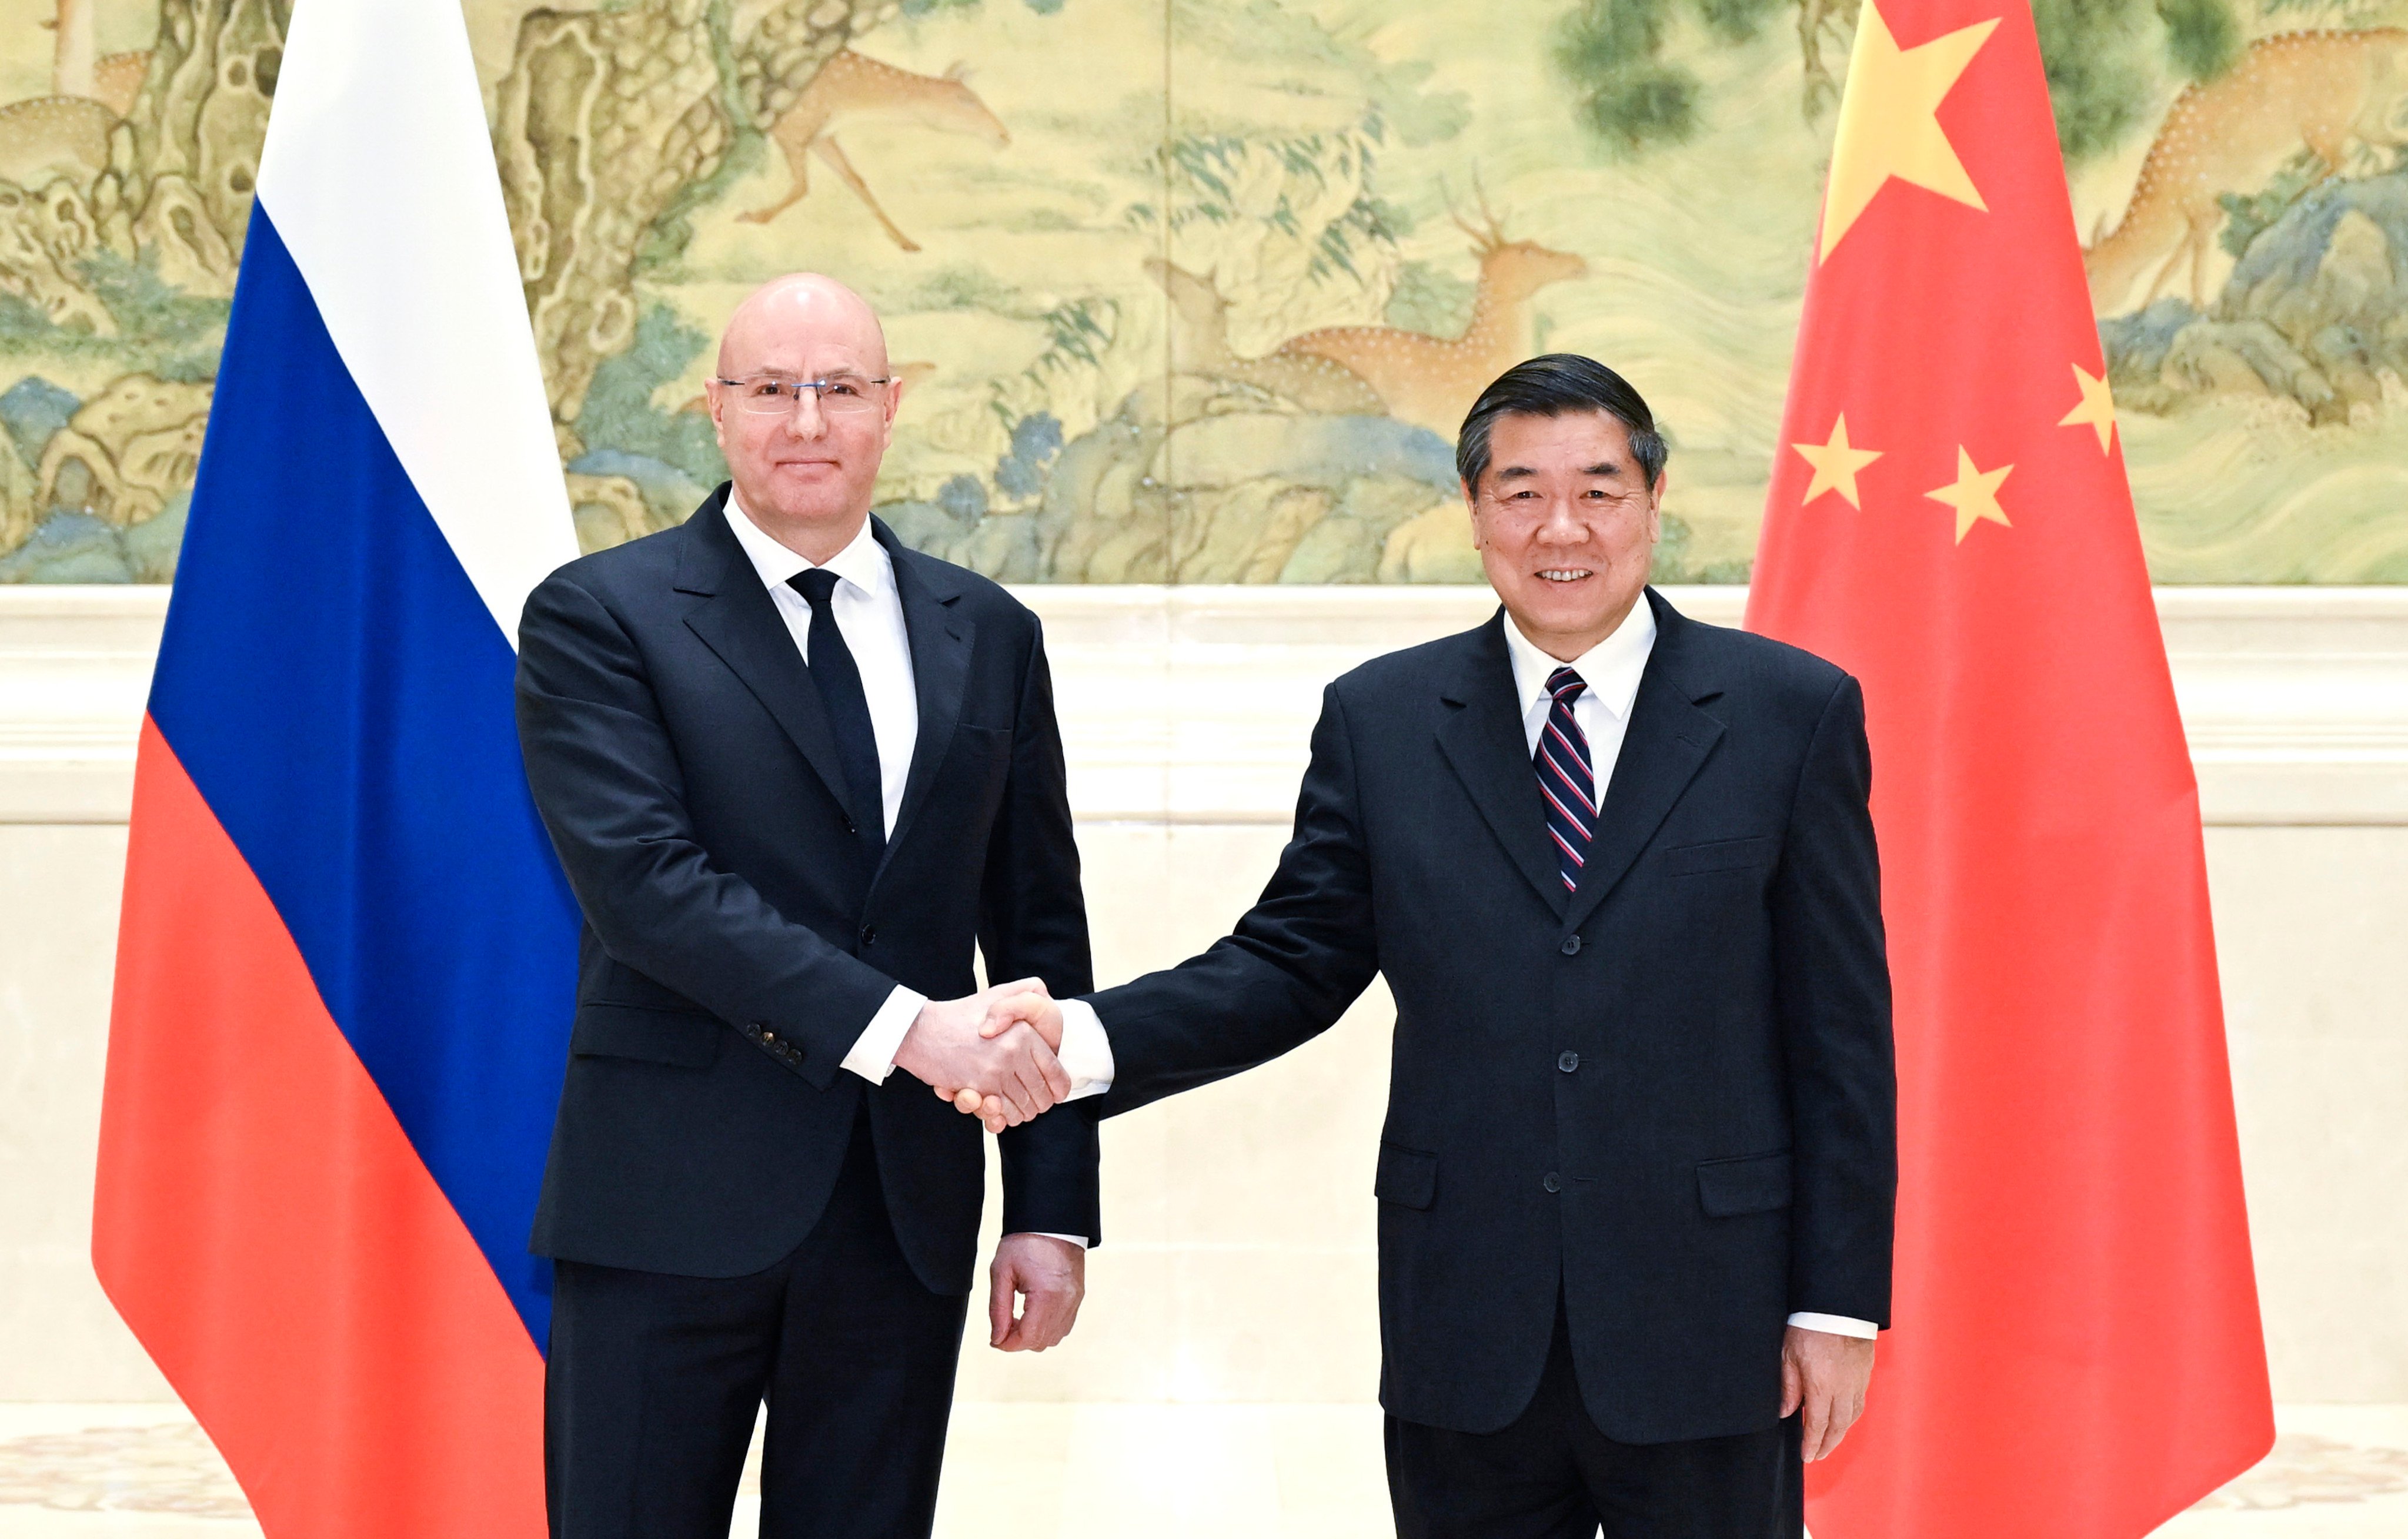 Chinese Vice-Premier He Lifeng appears with Russian Deputy Prime Minister Dmitry Chernyshenko in Beijing on Monday. Photo: Xinhua